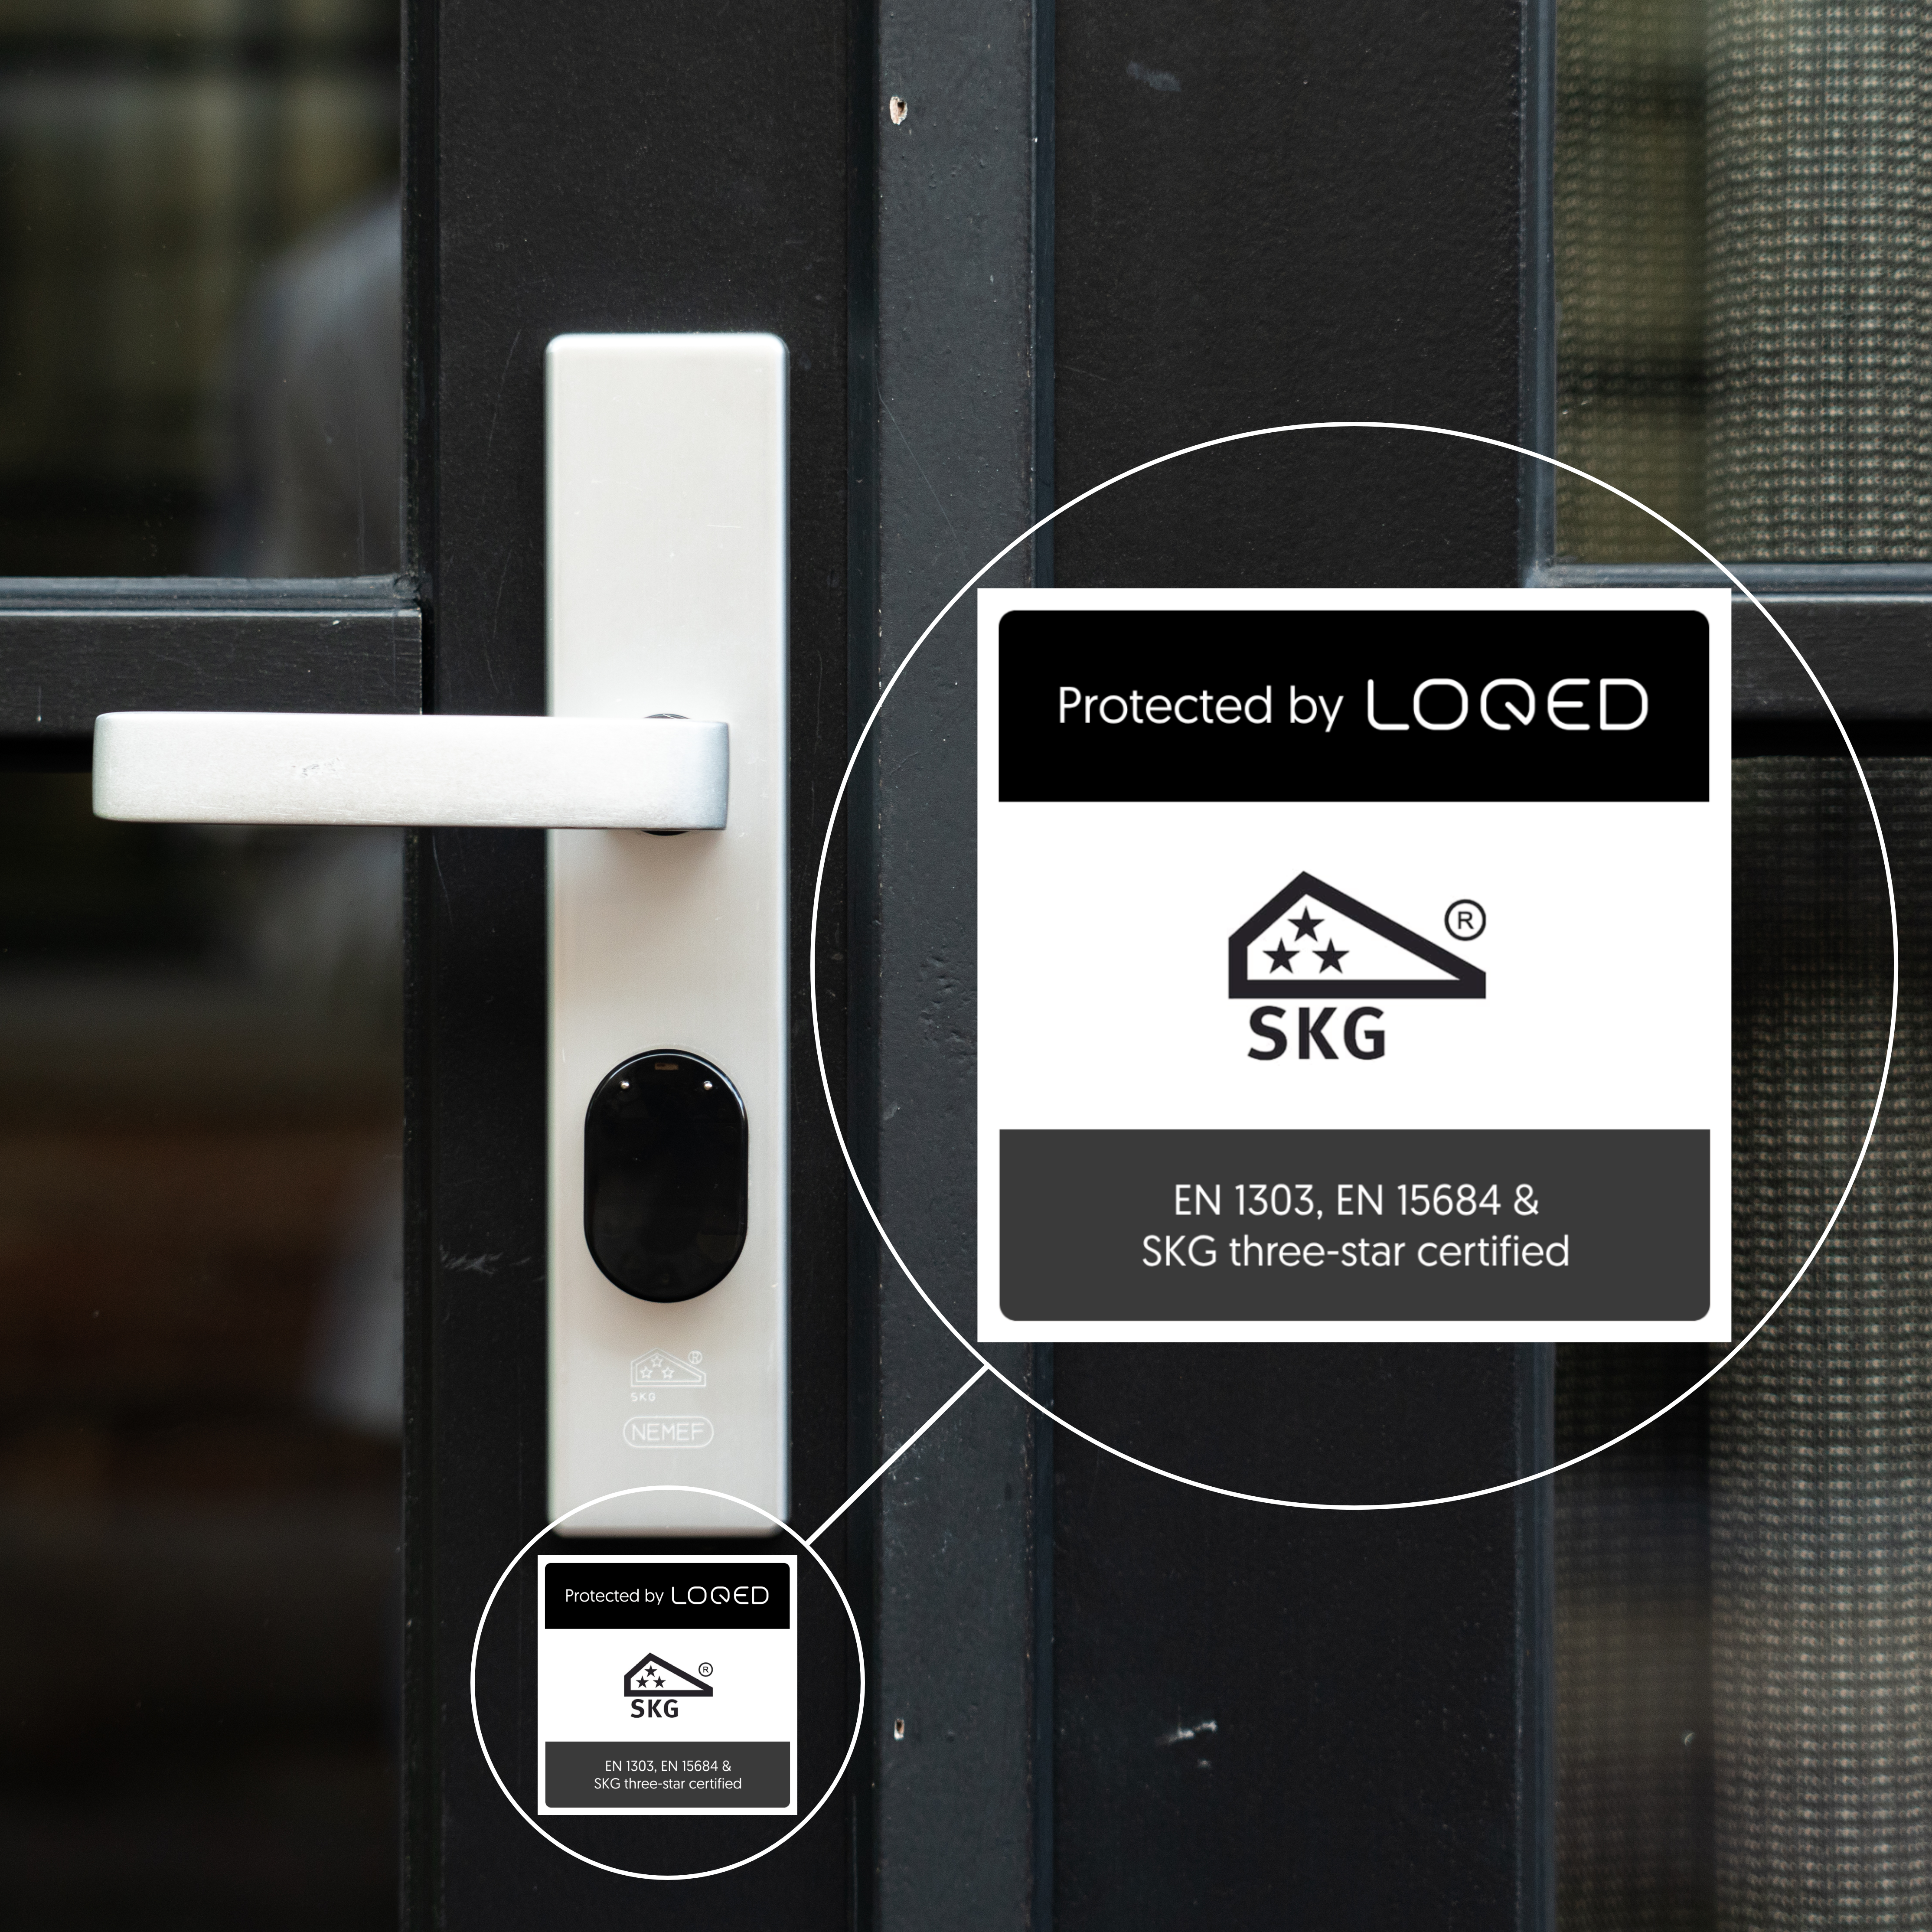 LOQED security sticker, in context